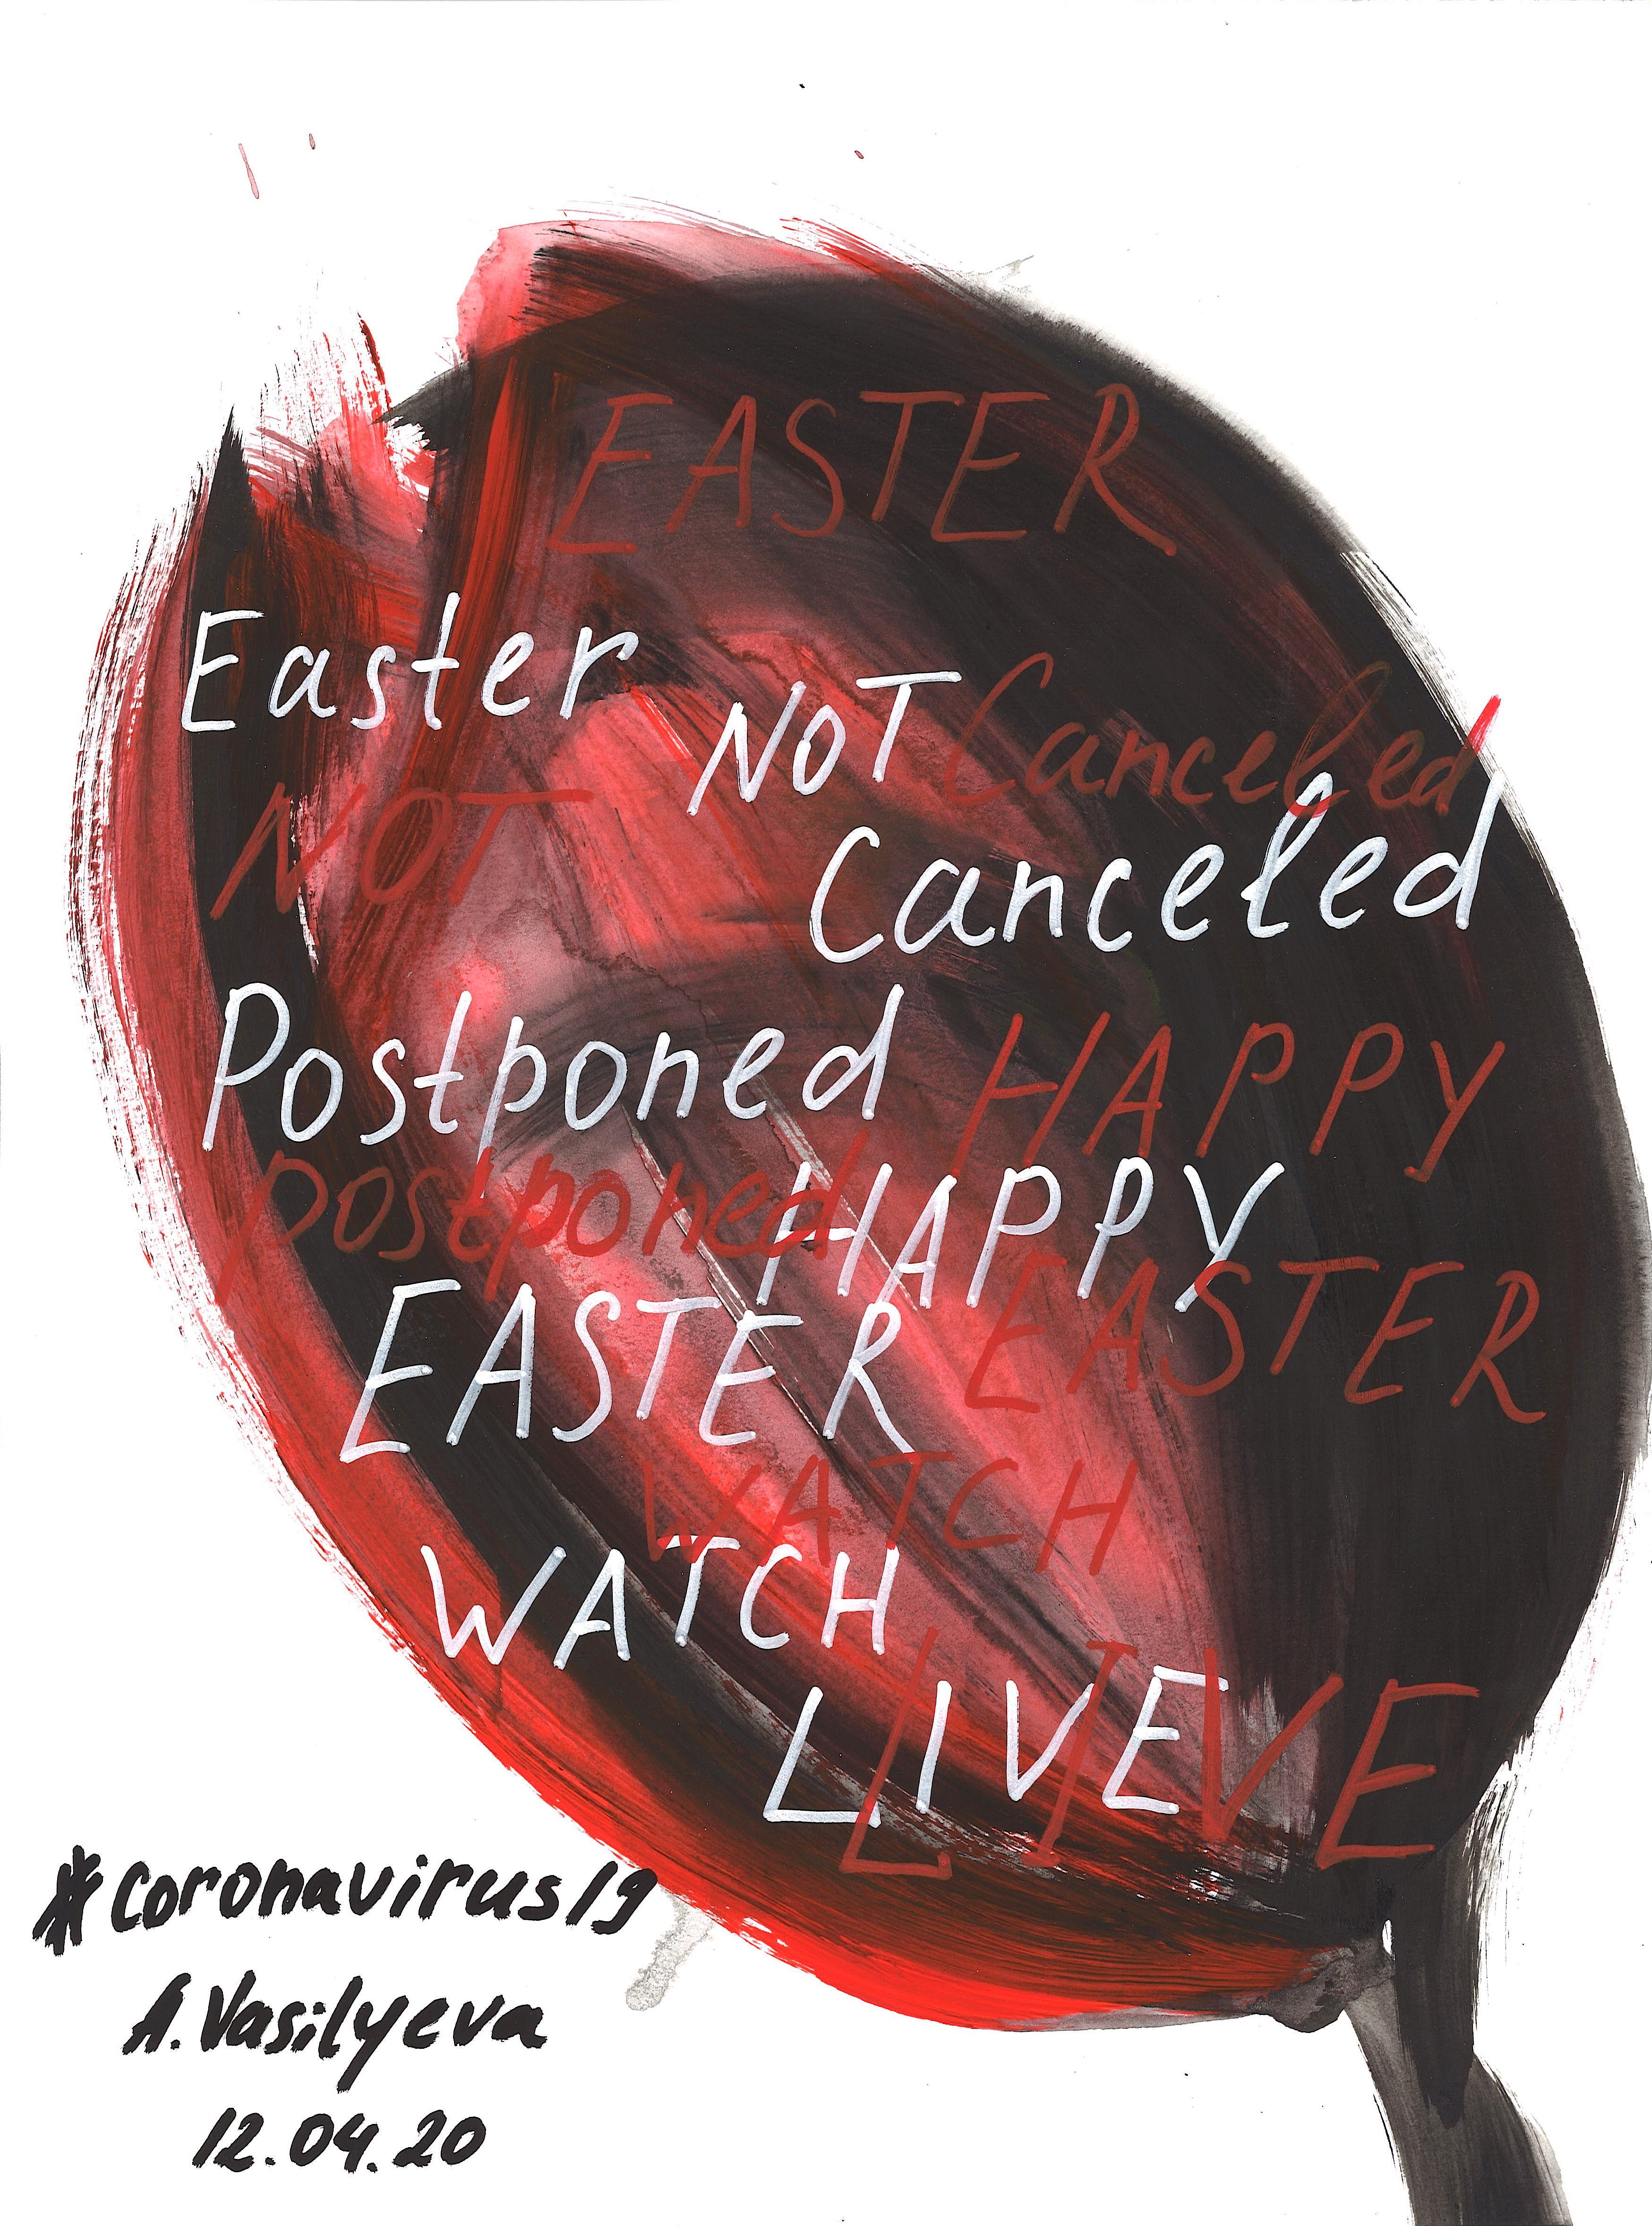 12.04.2020 - HAPPY EASTER. COVID-19 DOCUMENTARY ART on paper